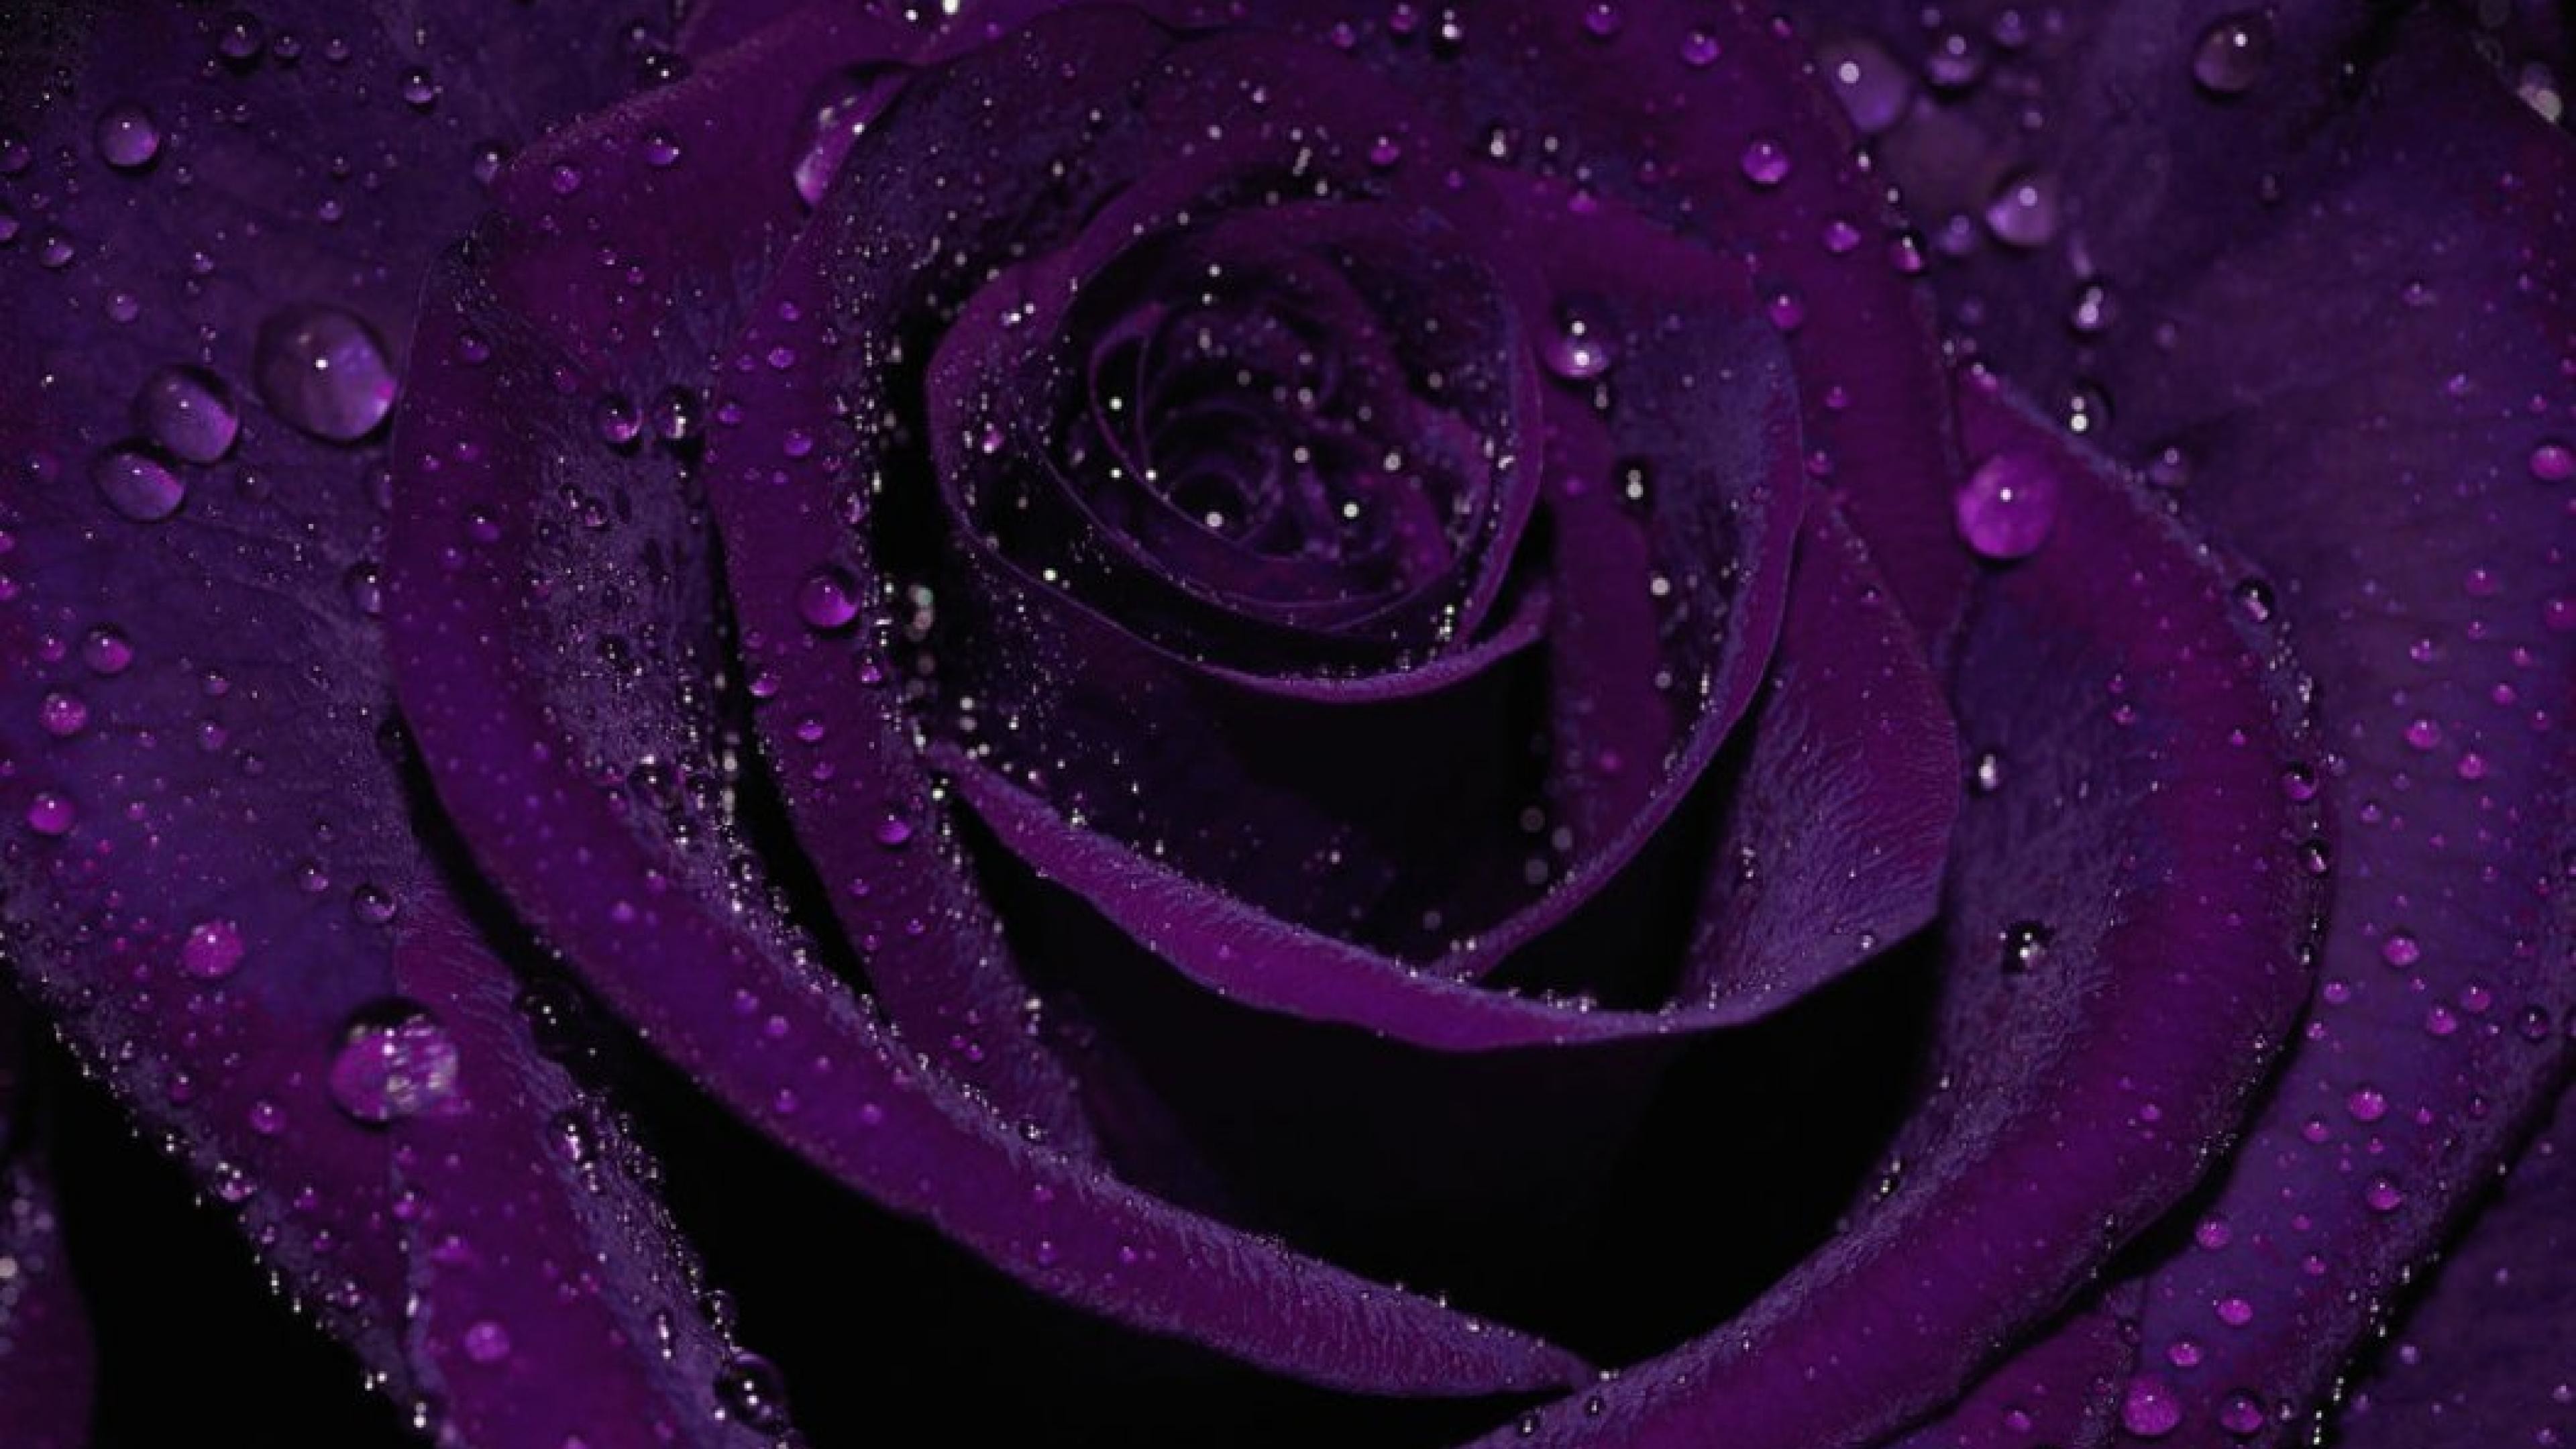 3840x2160 Purple Rose Wallpapers Images Photos Pictures Backgrounds